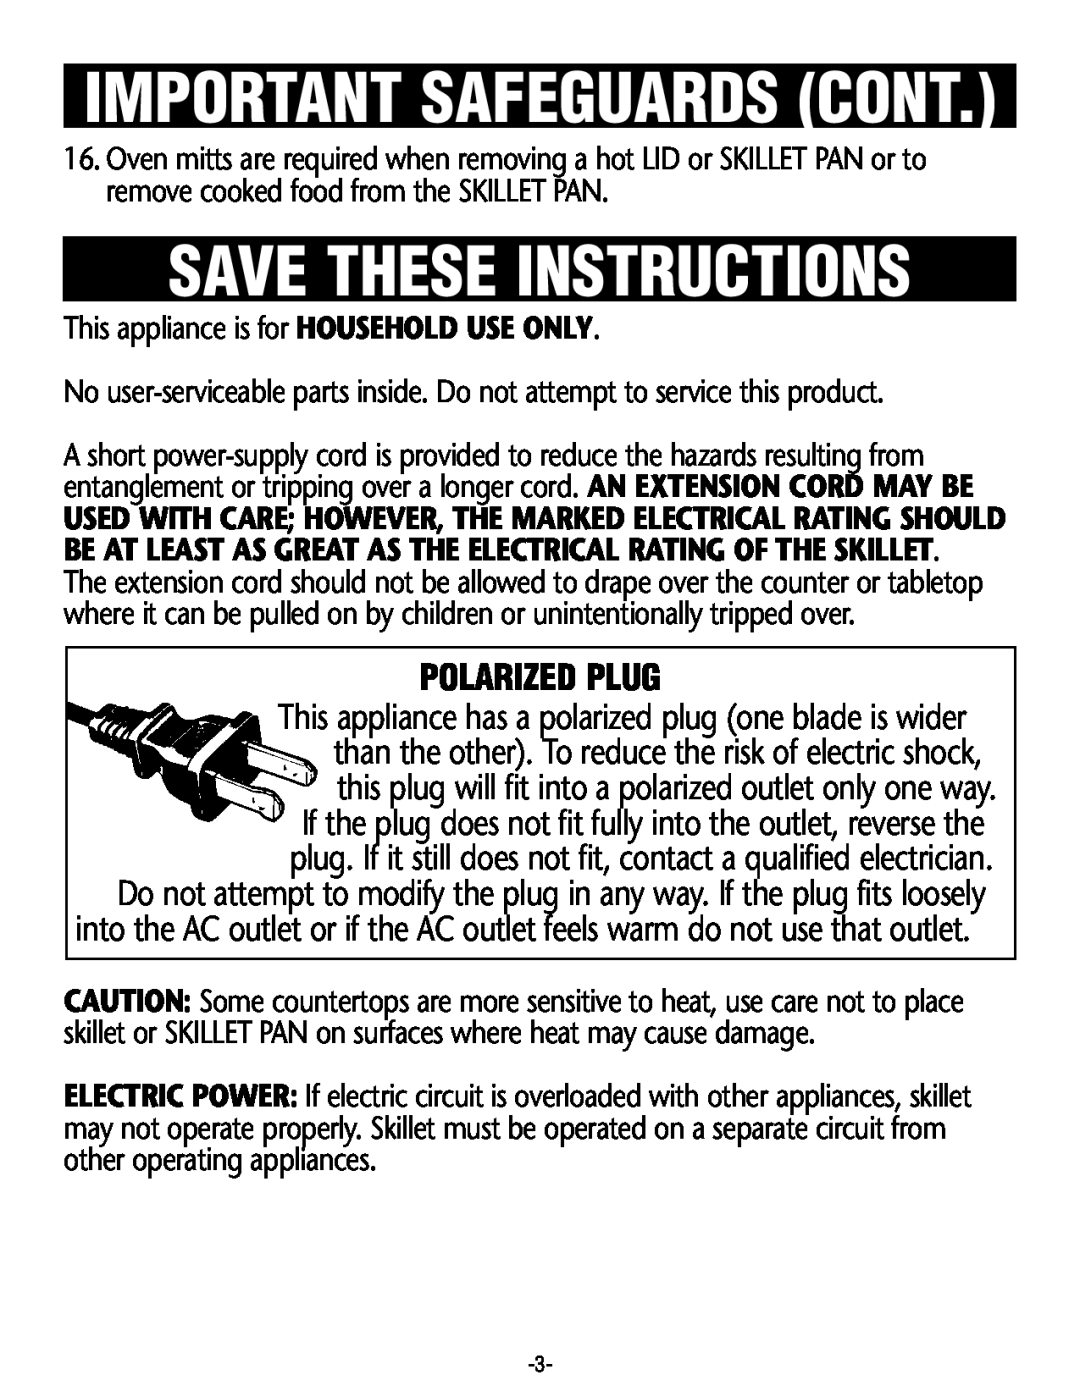 Rival S16RB manual Save These Instructions, Polarized Plug, Important Safeguards Cont 